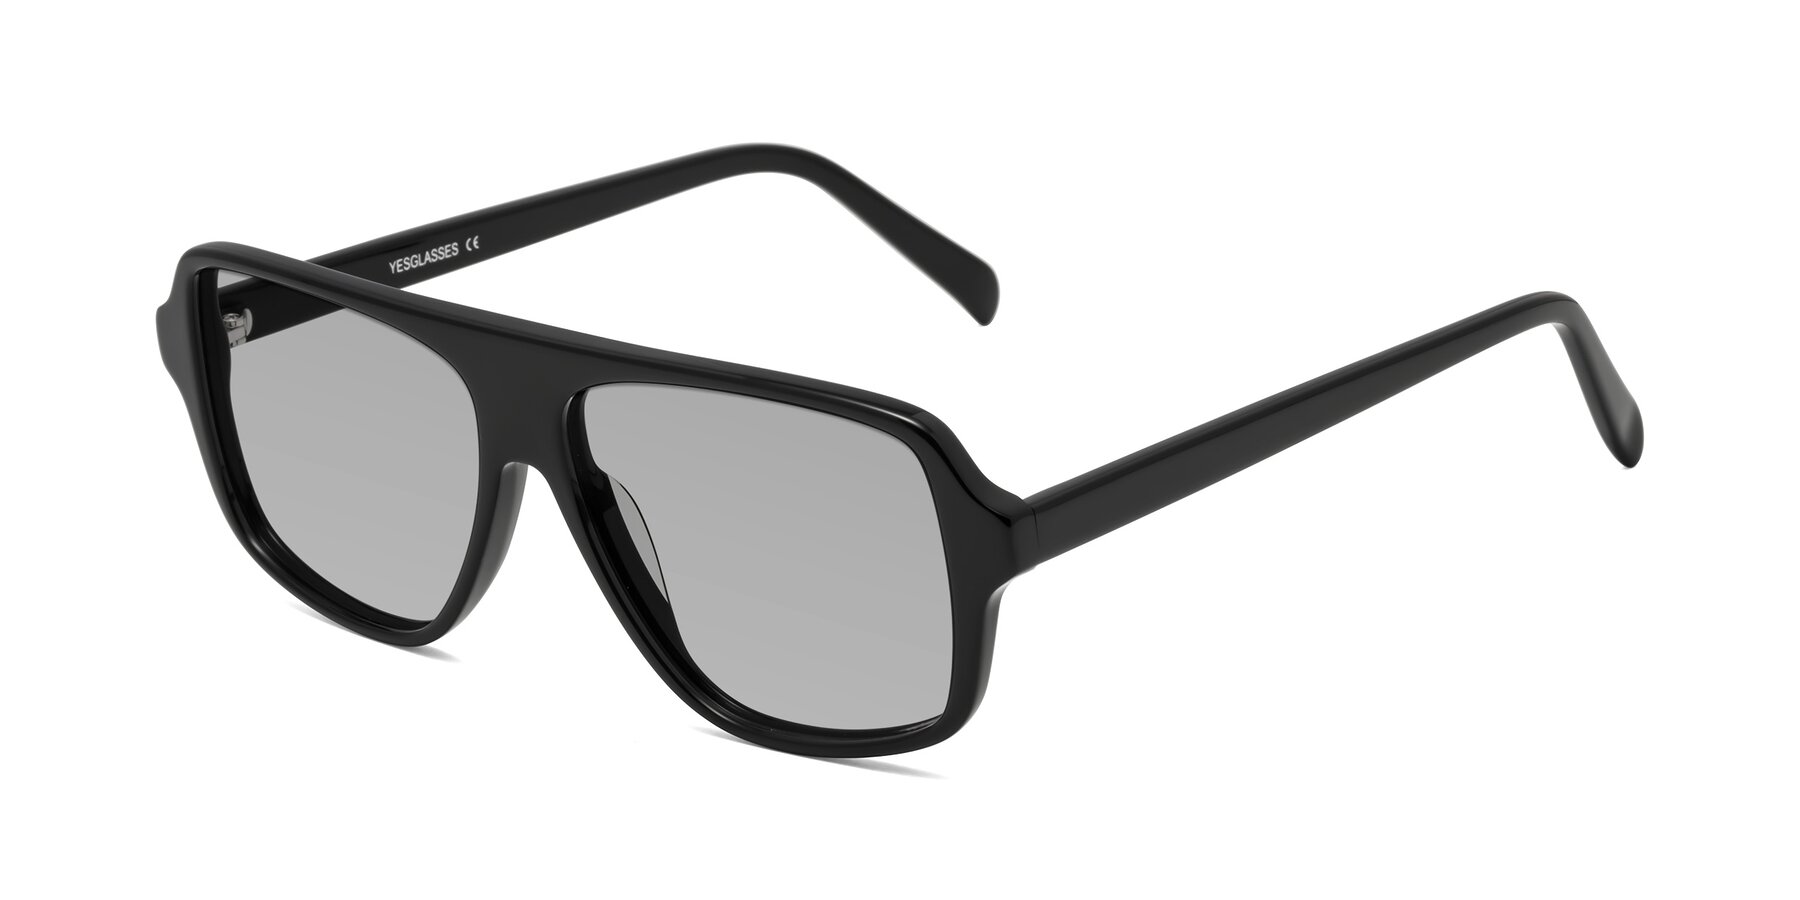 Angle of O'Leary in Black with Light Gray Tinted Lenses